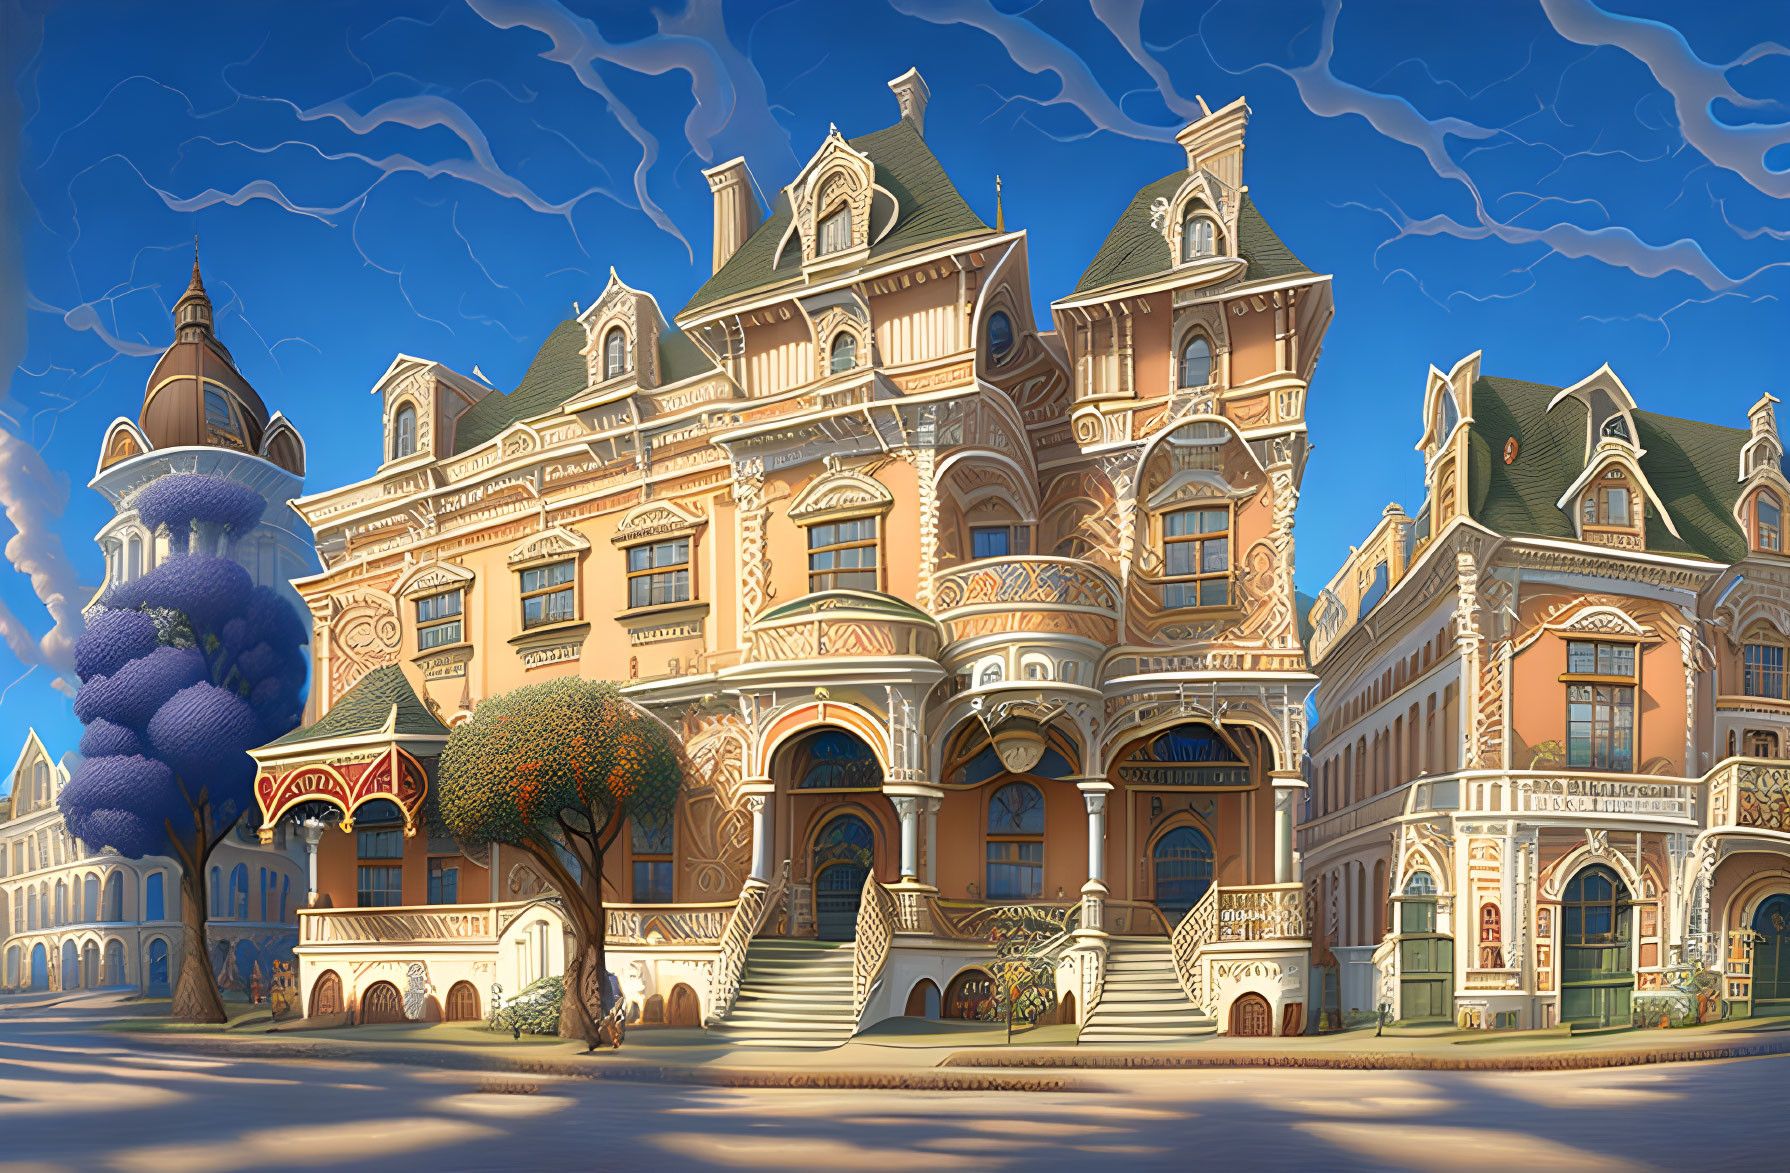 Ornate Victorian-style mansion illustration with fantastical architecture